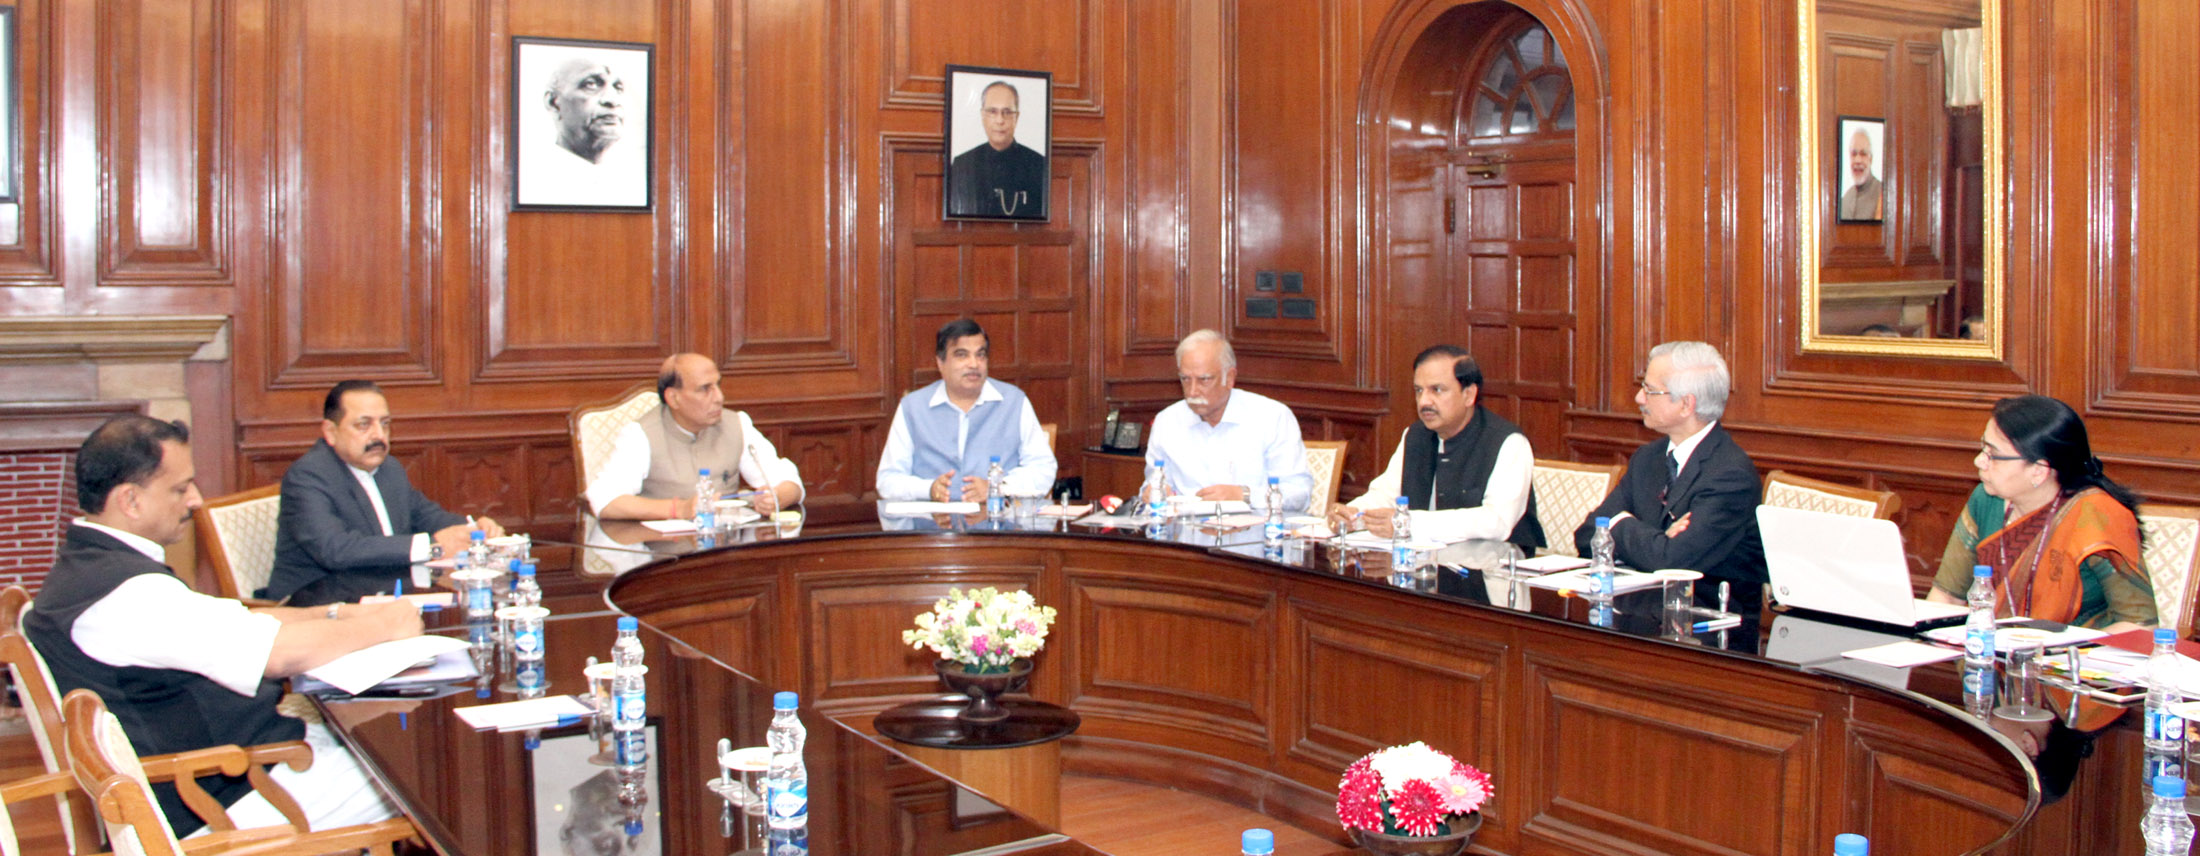 The Union Home Minister, Shri Rajnath Singh chairing the Group of Ministers meeting on the Civil Aviation Policy, in New Delhi on March 04, 2016.